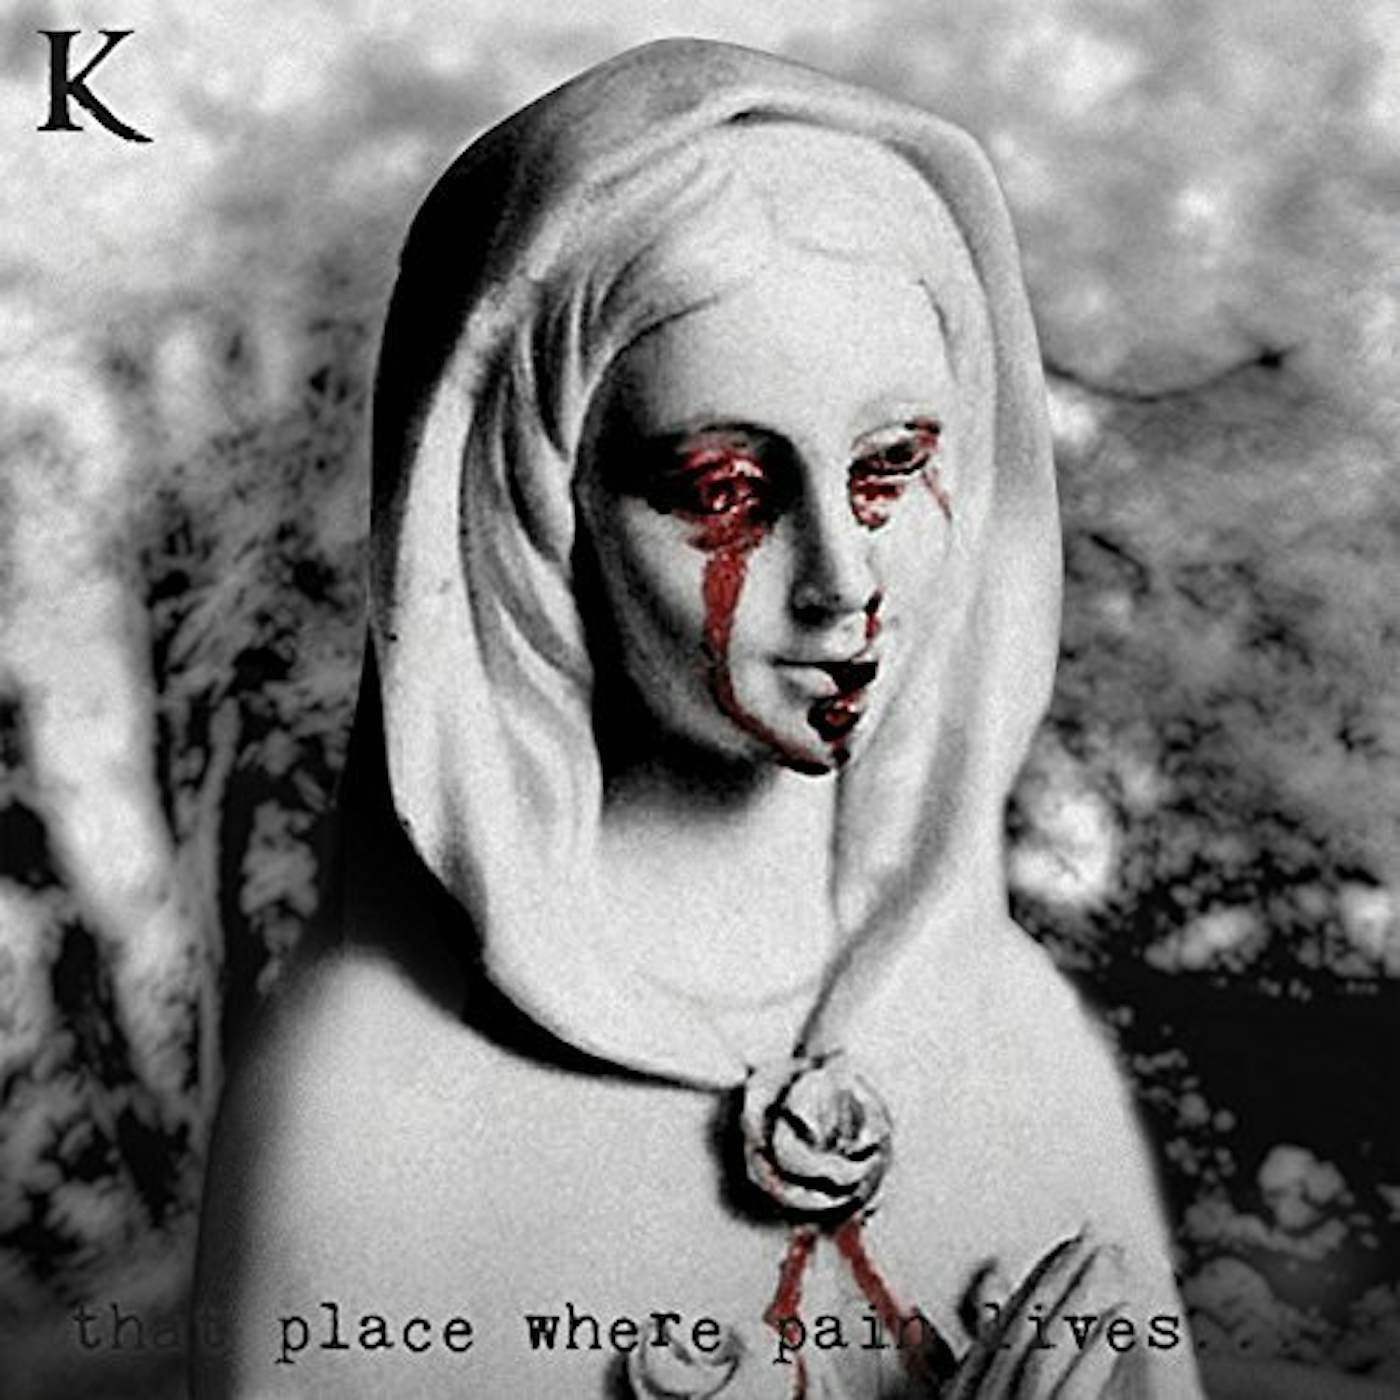 King 810 THAT PLACE WHERE PAIN LIVES Vinyl Record